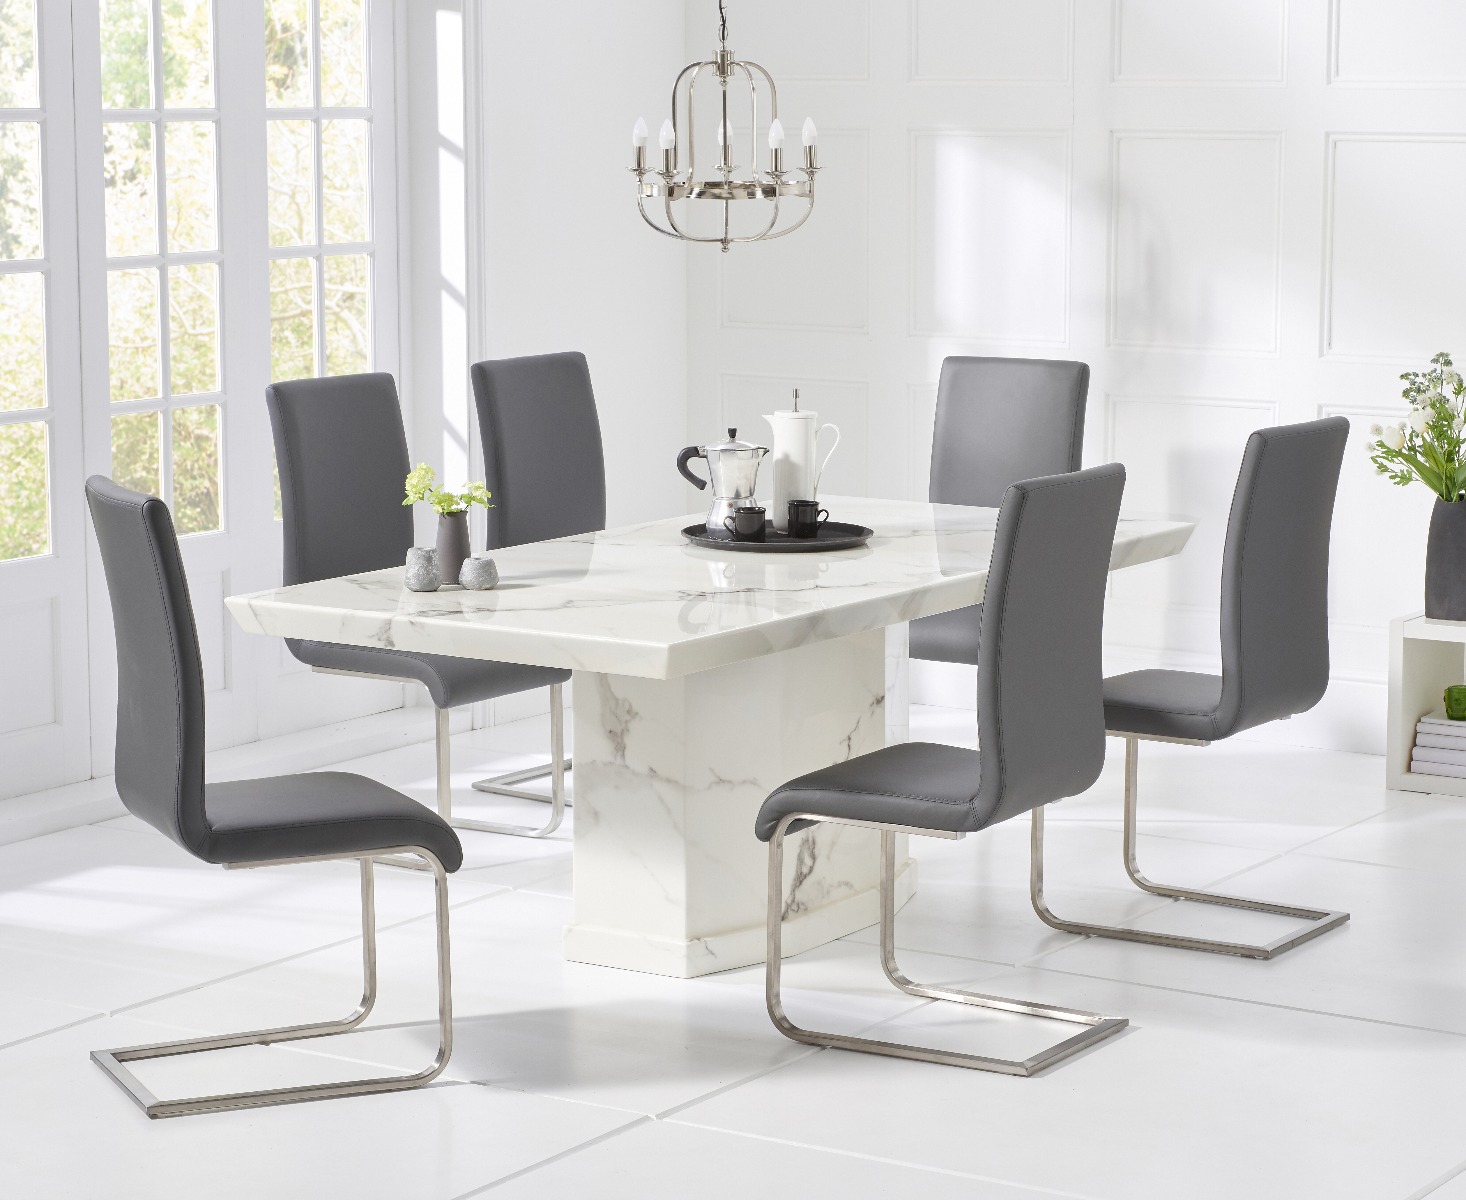 Carvelle 200cm White Pedestal Marble Dining Table With 10 Black Malaga Chairs